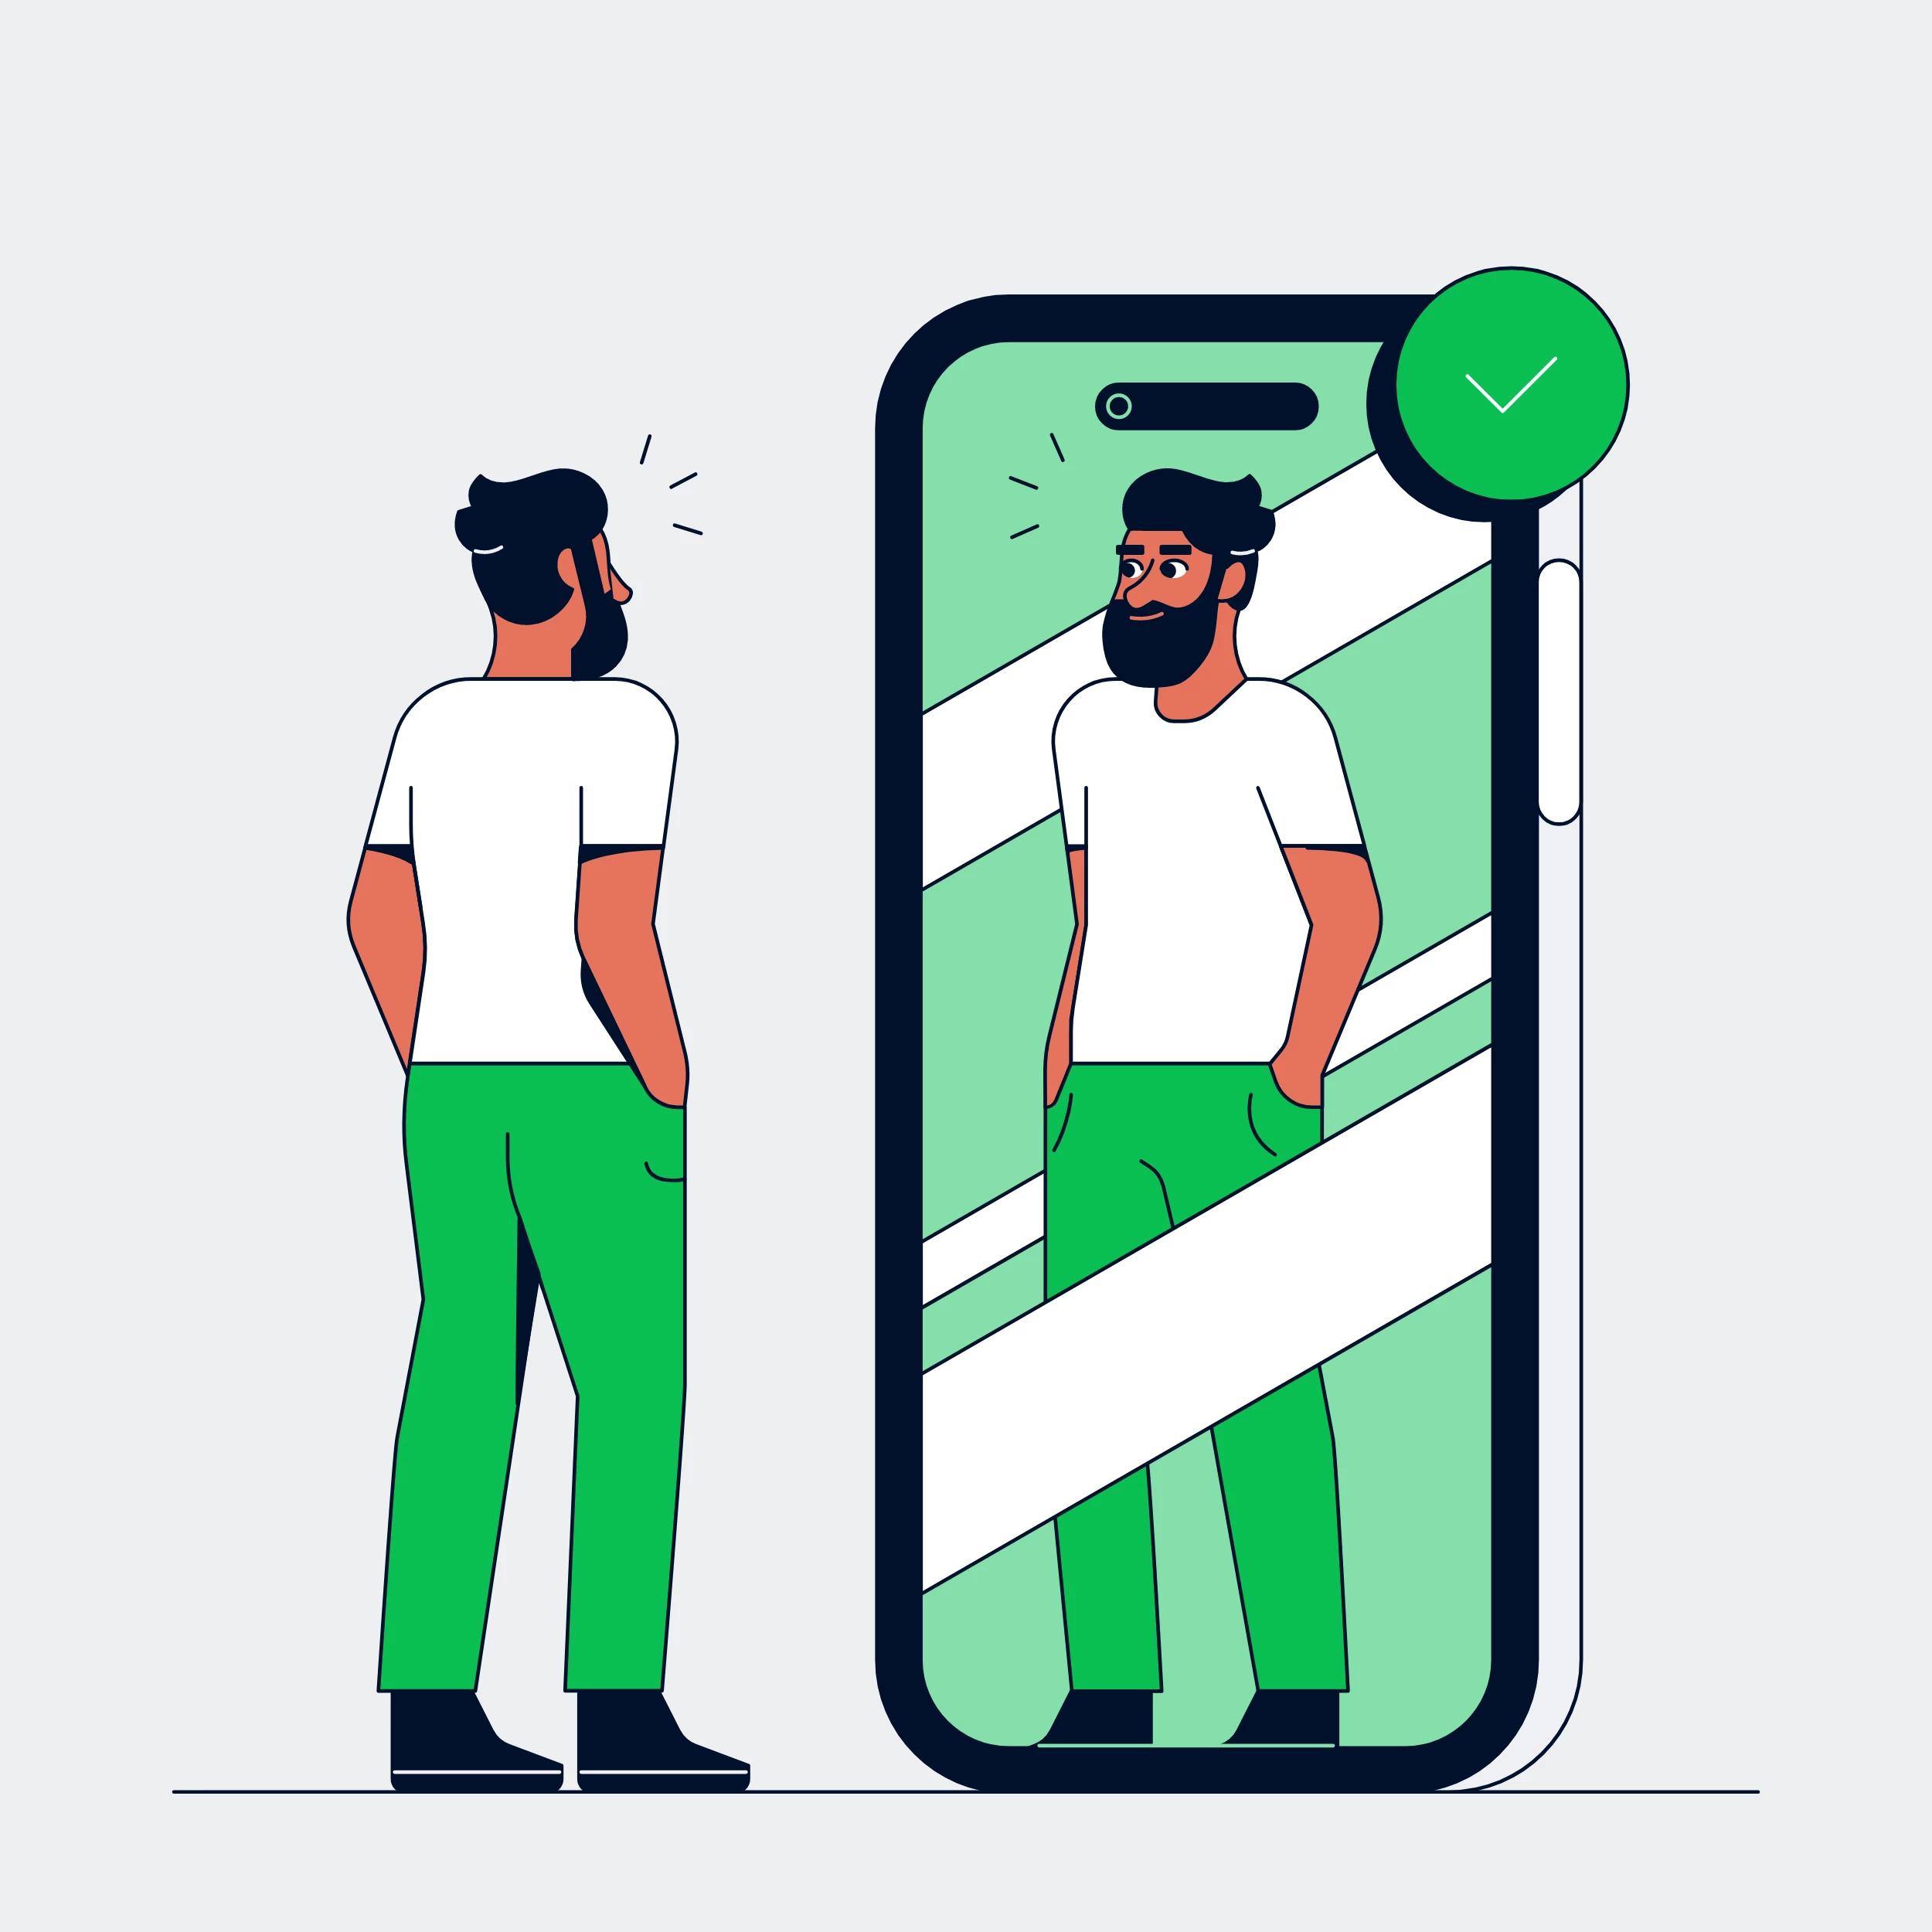 An Illustration of a man looking at his reflection on a phone